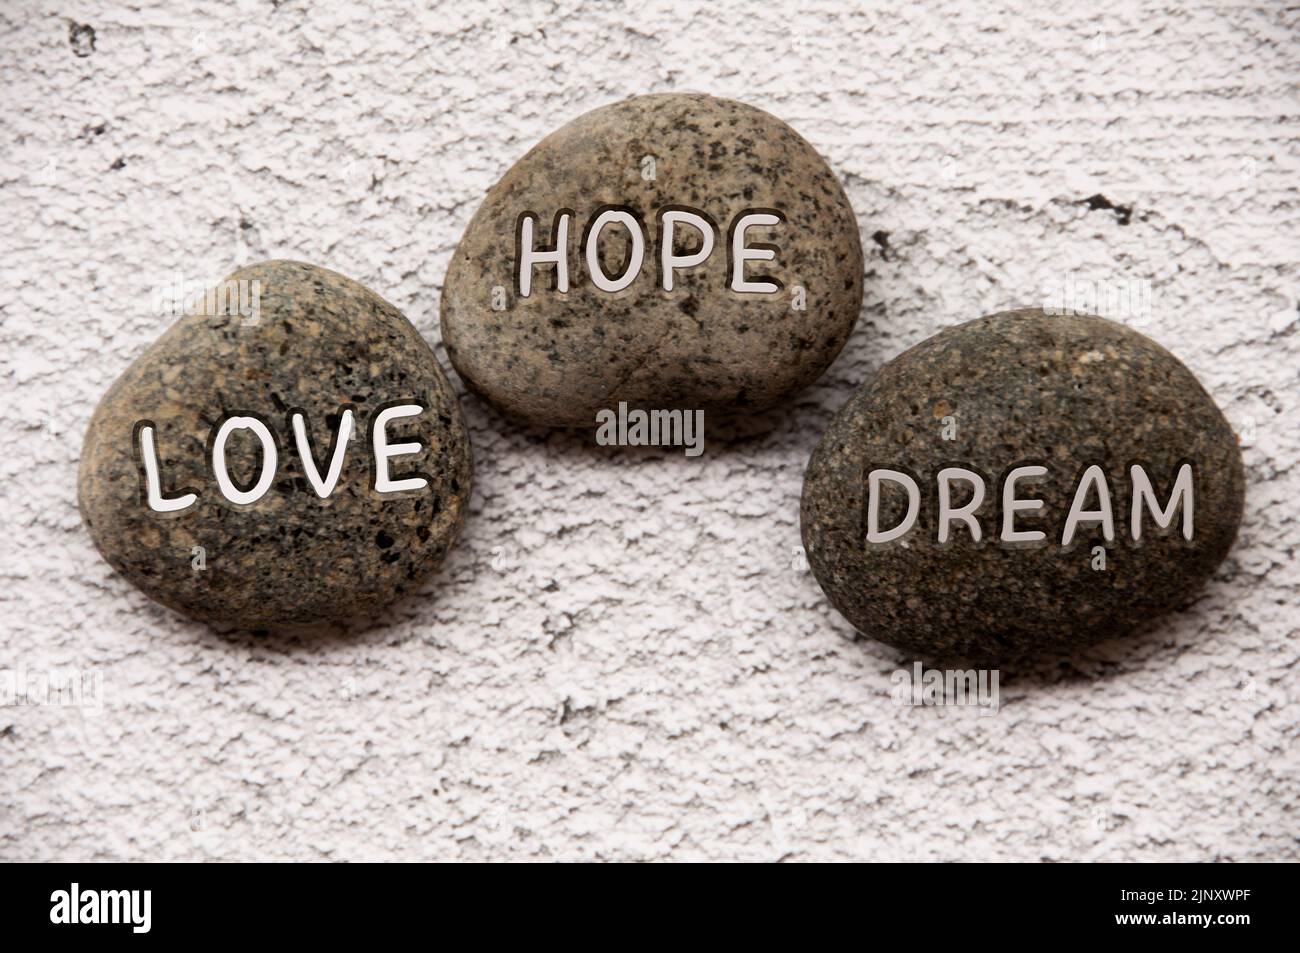 Love, hope and dream text engraved on stones. Life concept. Stock Photo